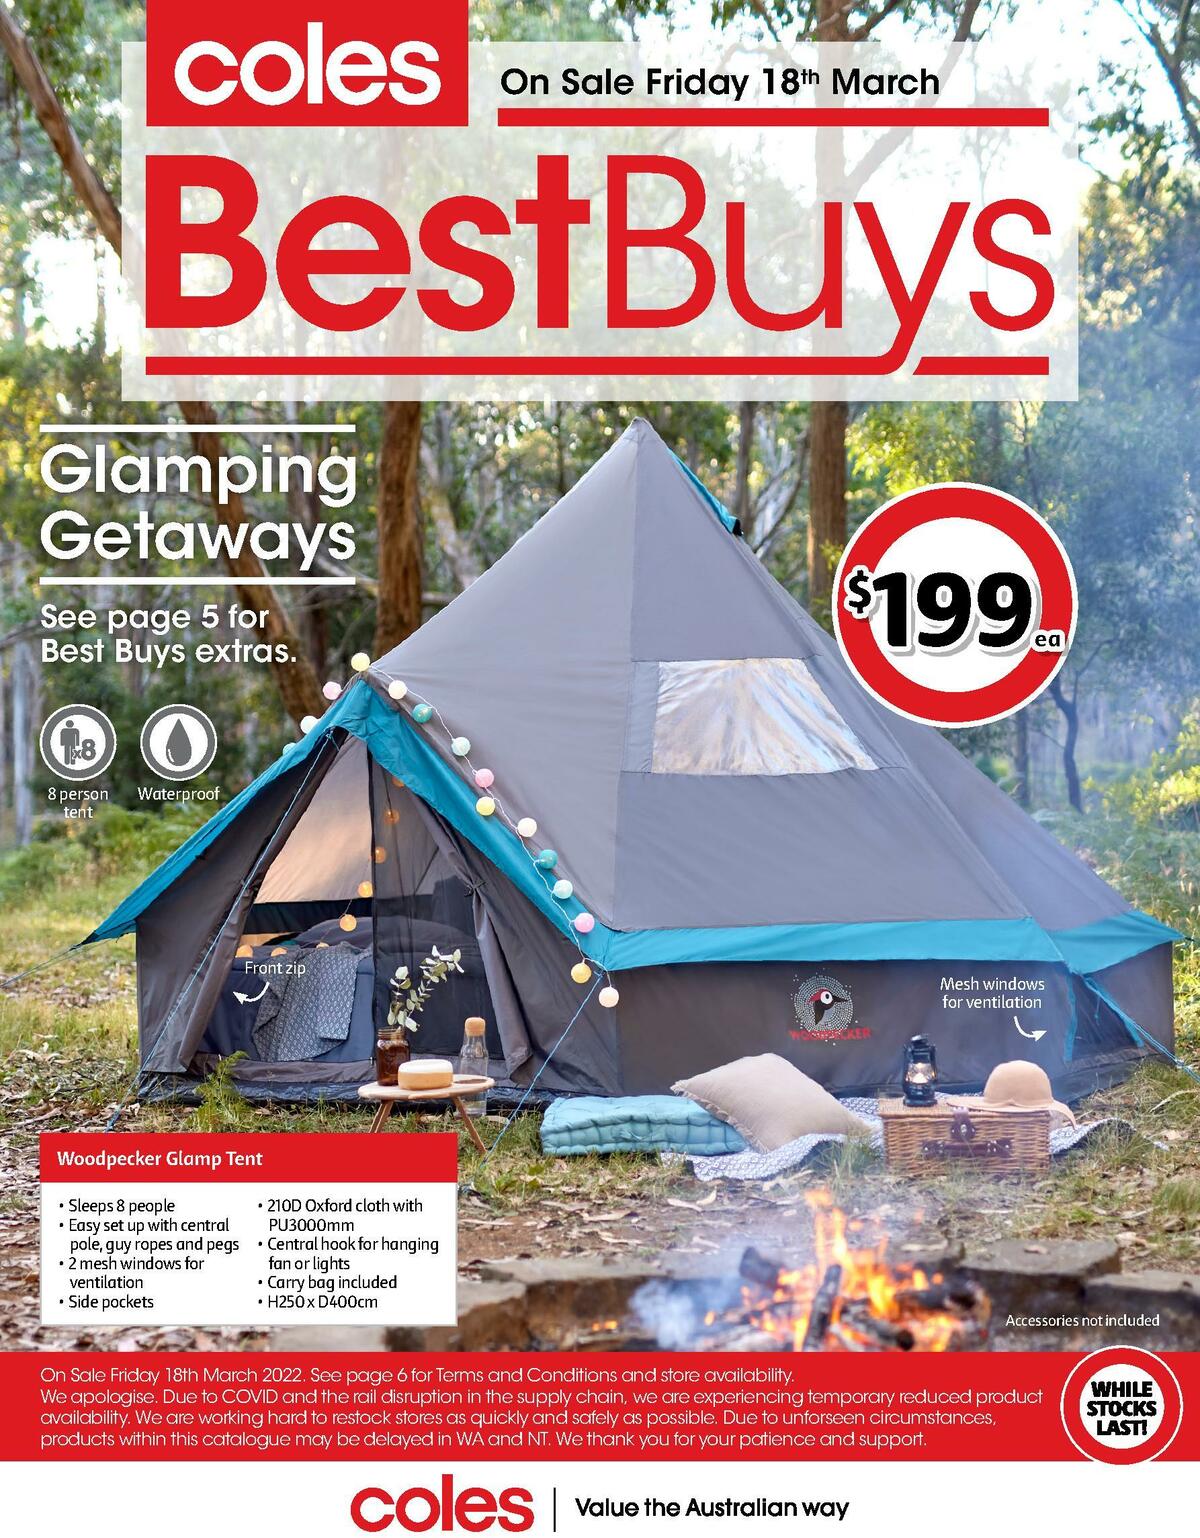 Coles Best Buys - Glamping Getaways Catalogues from 18 March